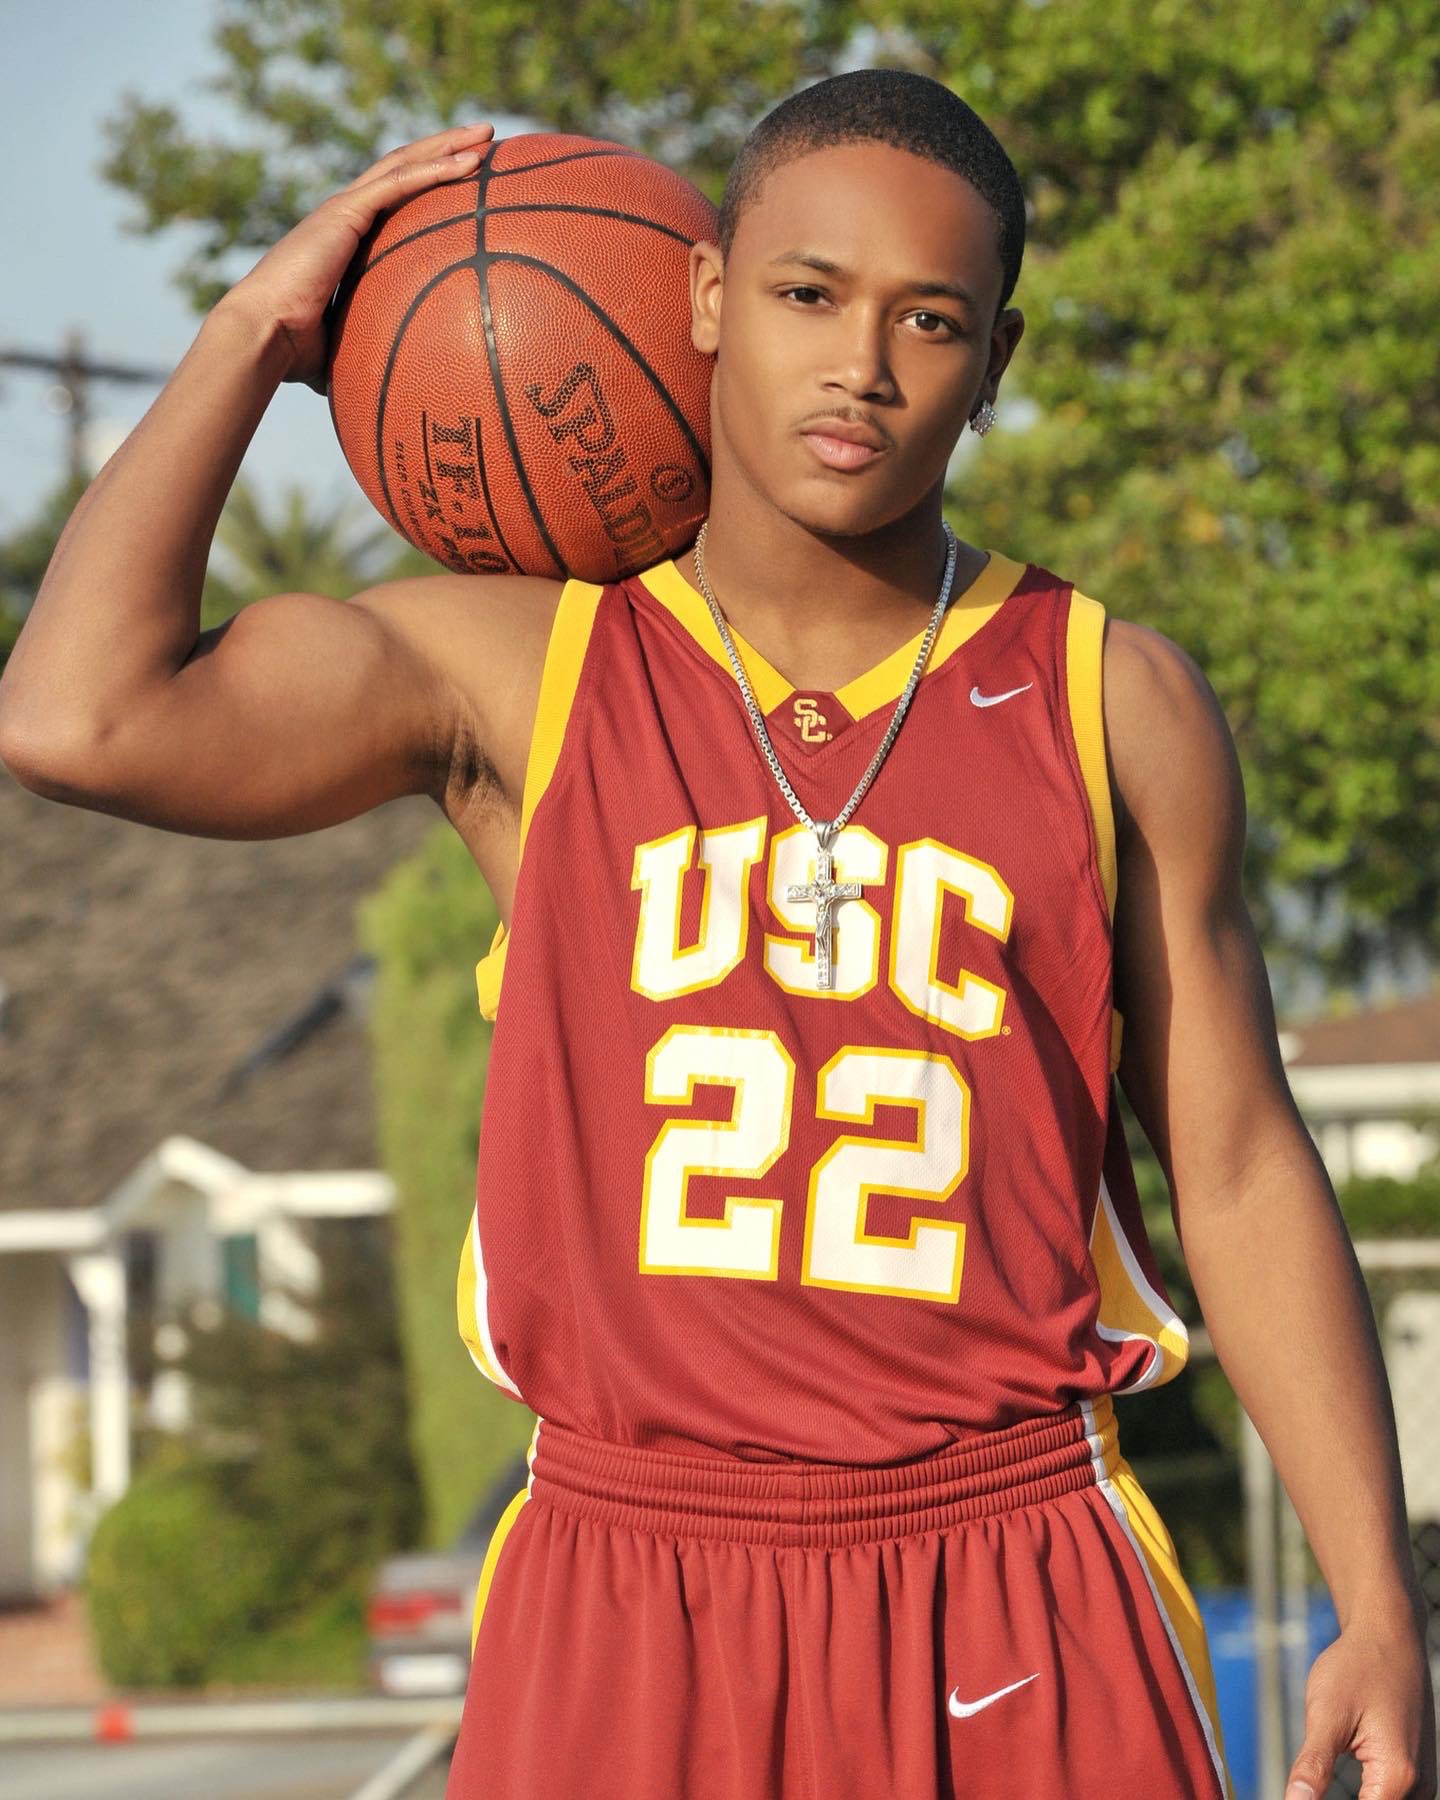 Romeo Miller Reflects on His Basketball Career